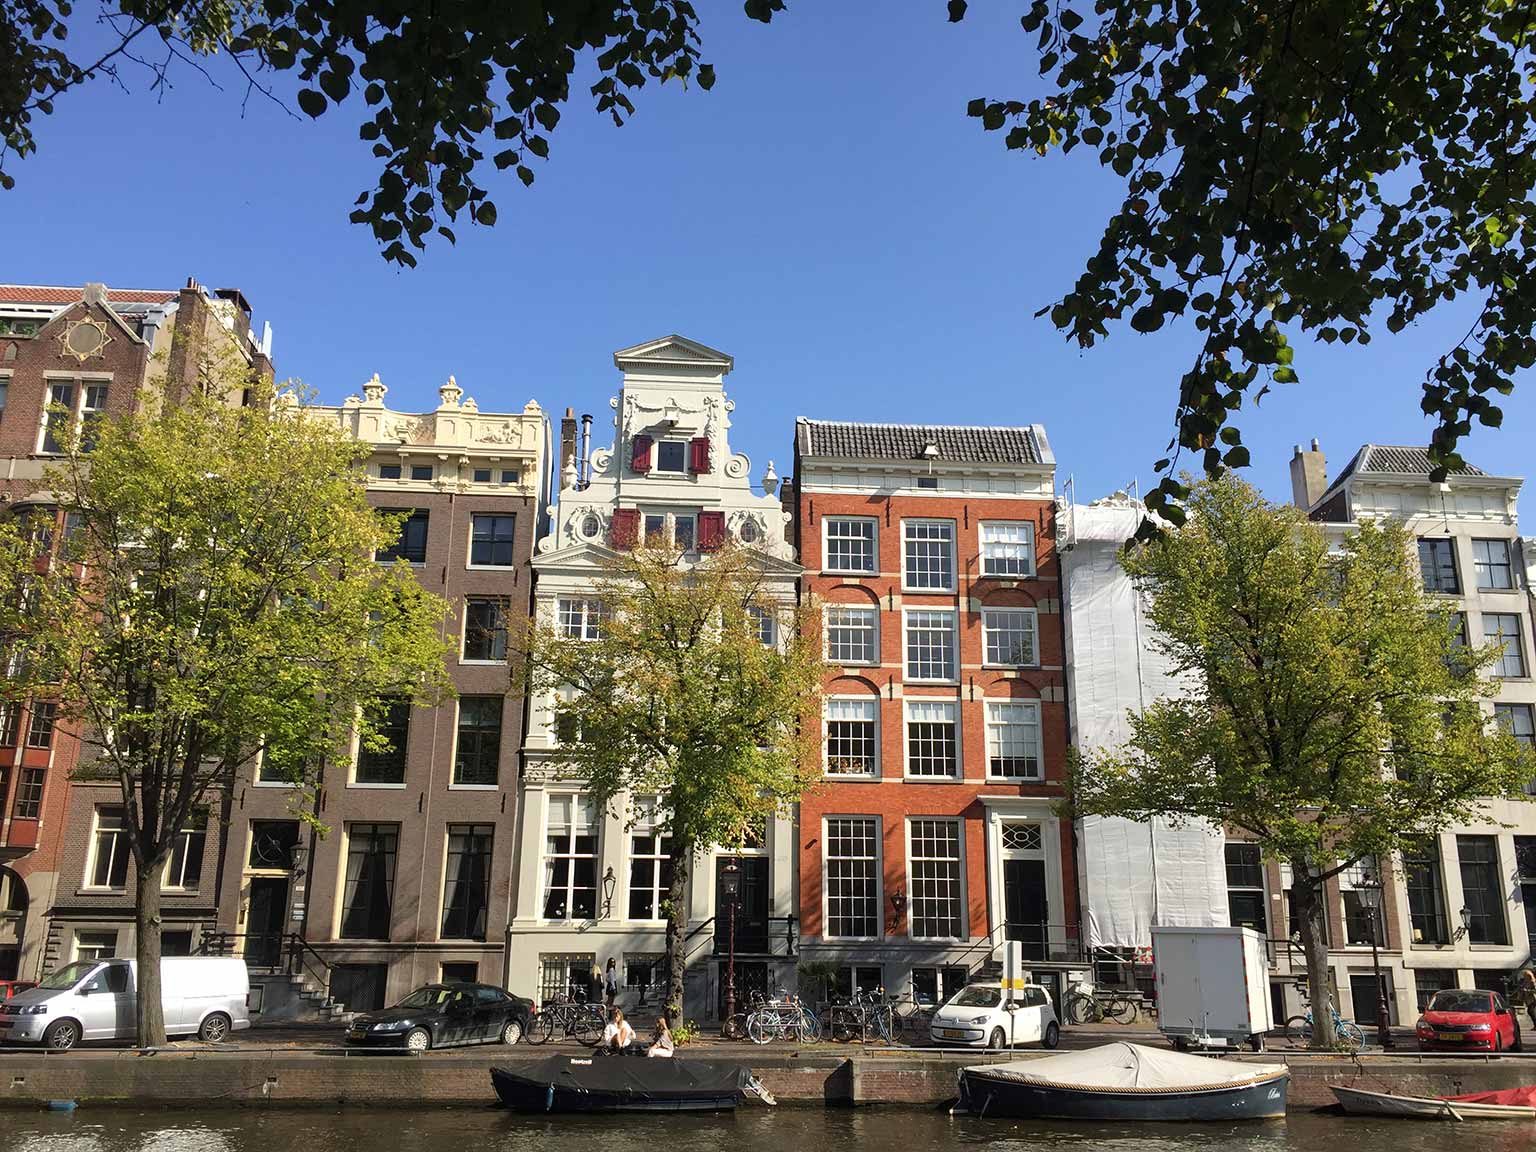 Gables on the Keizersgracht, Amsterdam, around the numbers 317-321